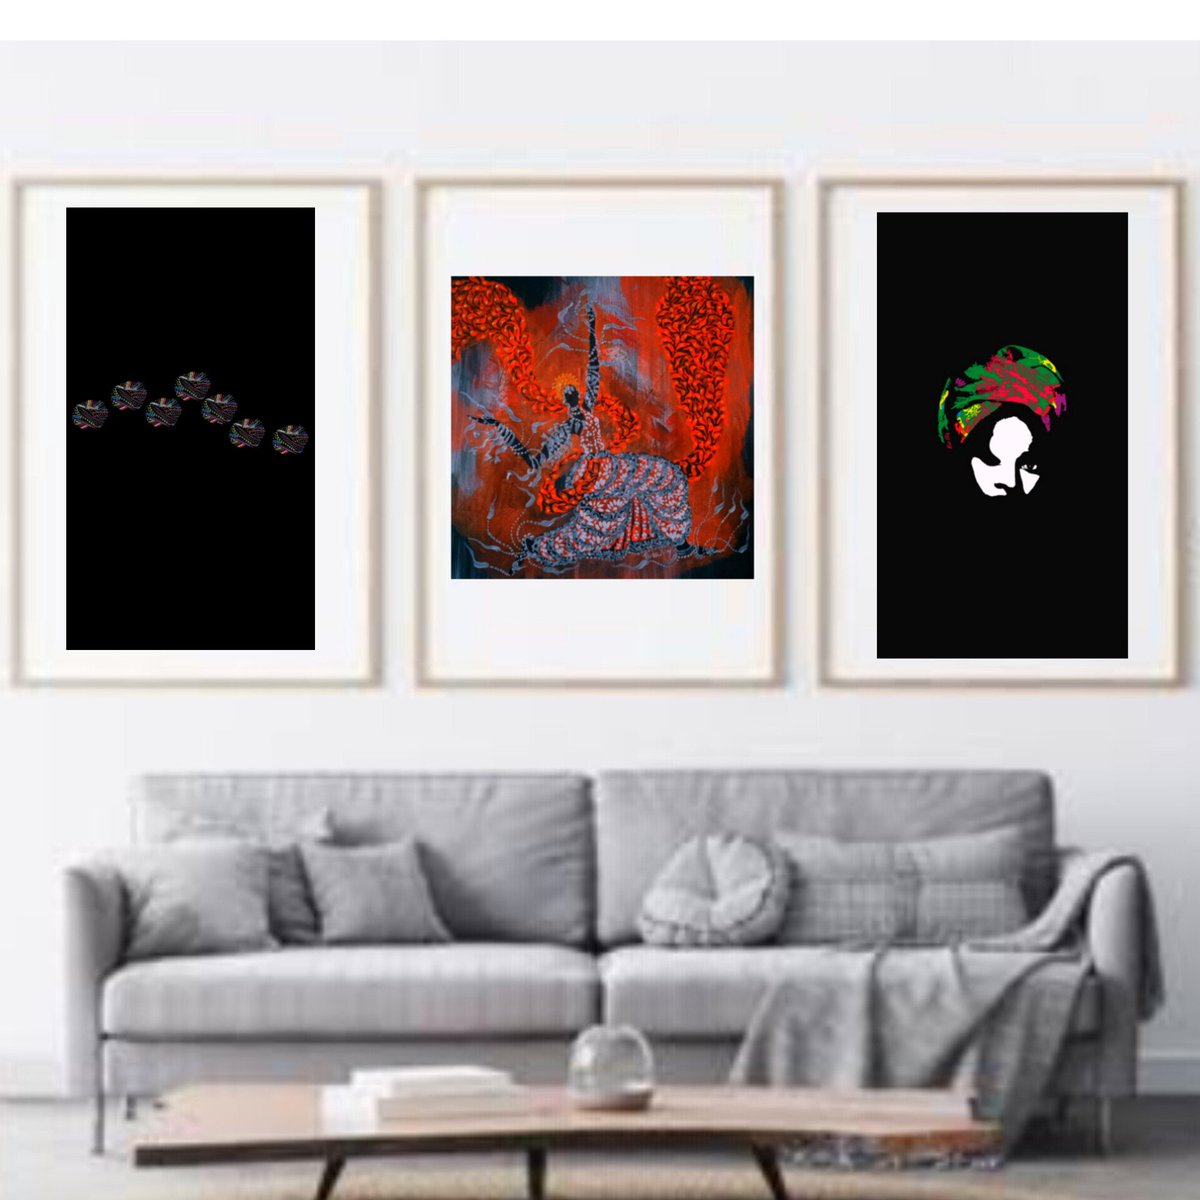 Hi #NFTCommunity 3 collection available on #opensea via @opensea Two digital and one physical work are available. If the #collectors prefer, the physical work will be sent #NFTs #NFTmarketplace #nftart #nftcollectors #OpenSeaCollection #OpenseaNFTs #CollectingTogether #ad #art